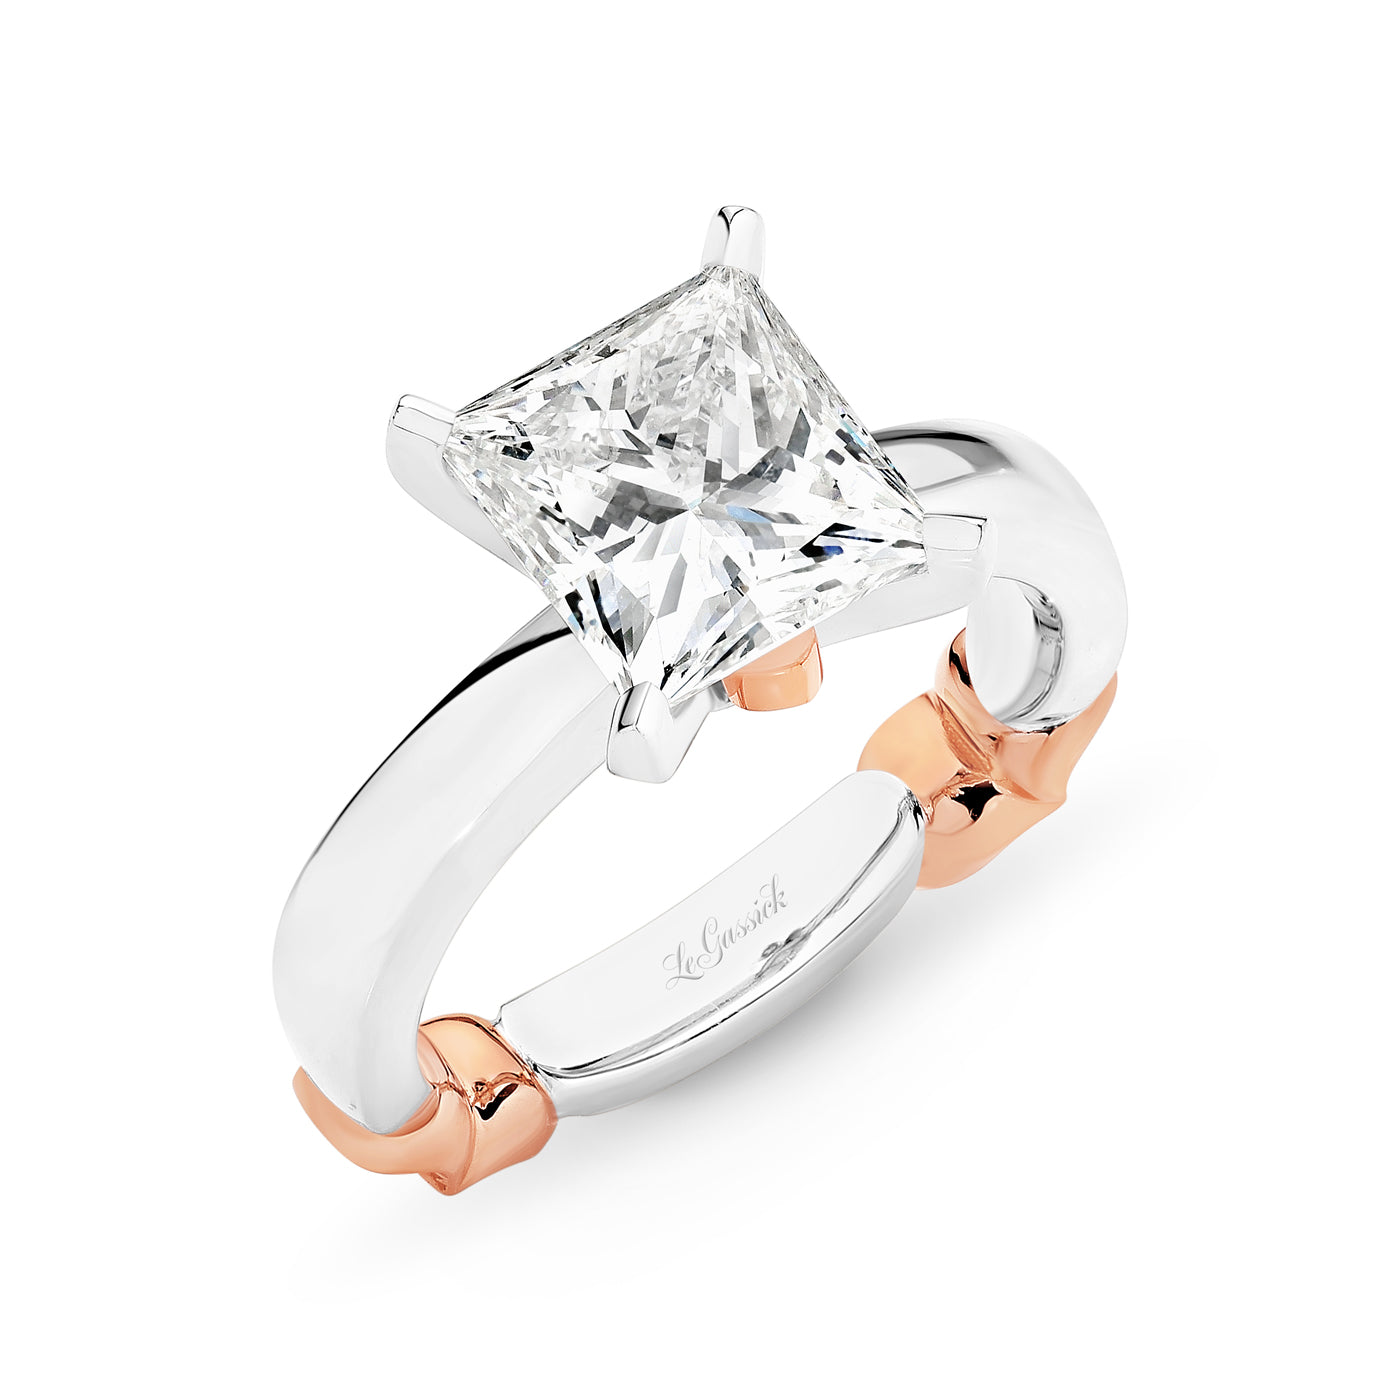 Juliette has a 3.73 Carat Princess Cut diamond centre stone. Set in 18-carat white and rose gold with three rare natural Argyle Pink diamonds. She was designed and handcrafted by LeGassick's Master Jewellers, Gold Coast, Australia.